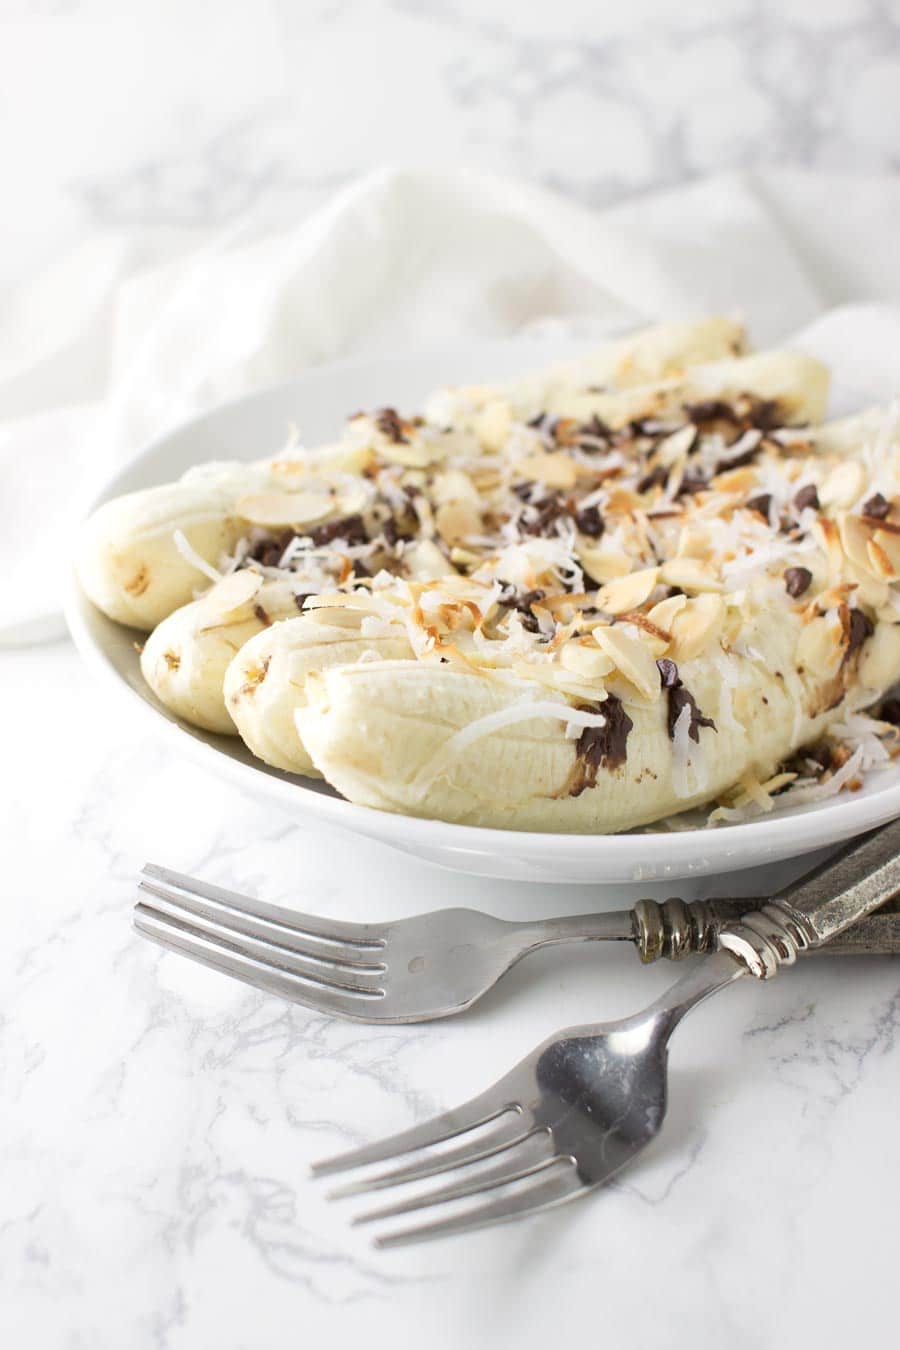 Baked Bananas recipe from acleanplate.com #aip #paleo #